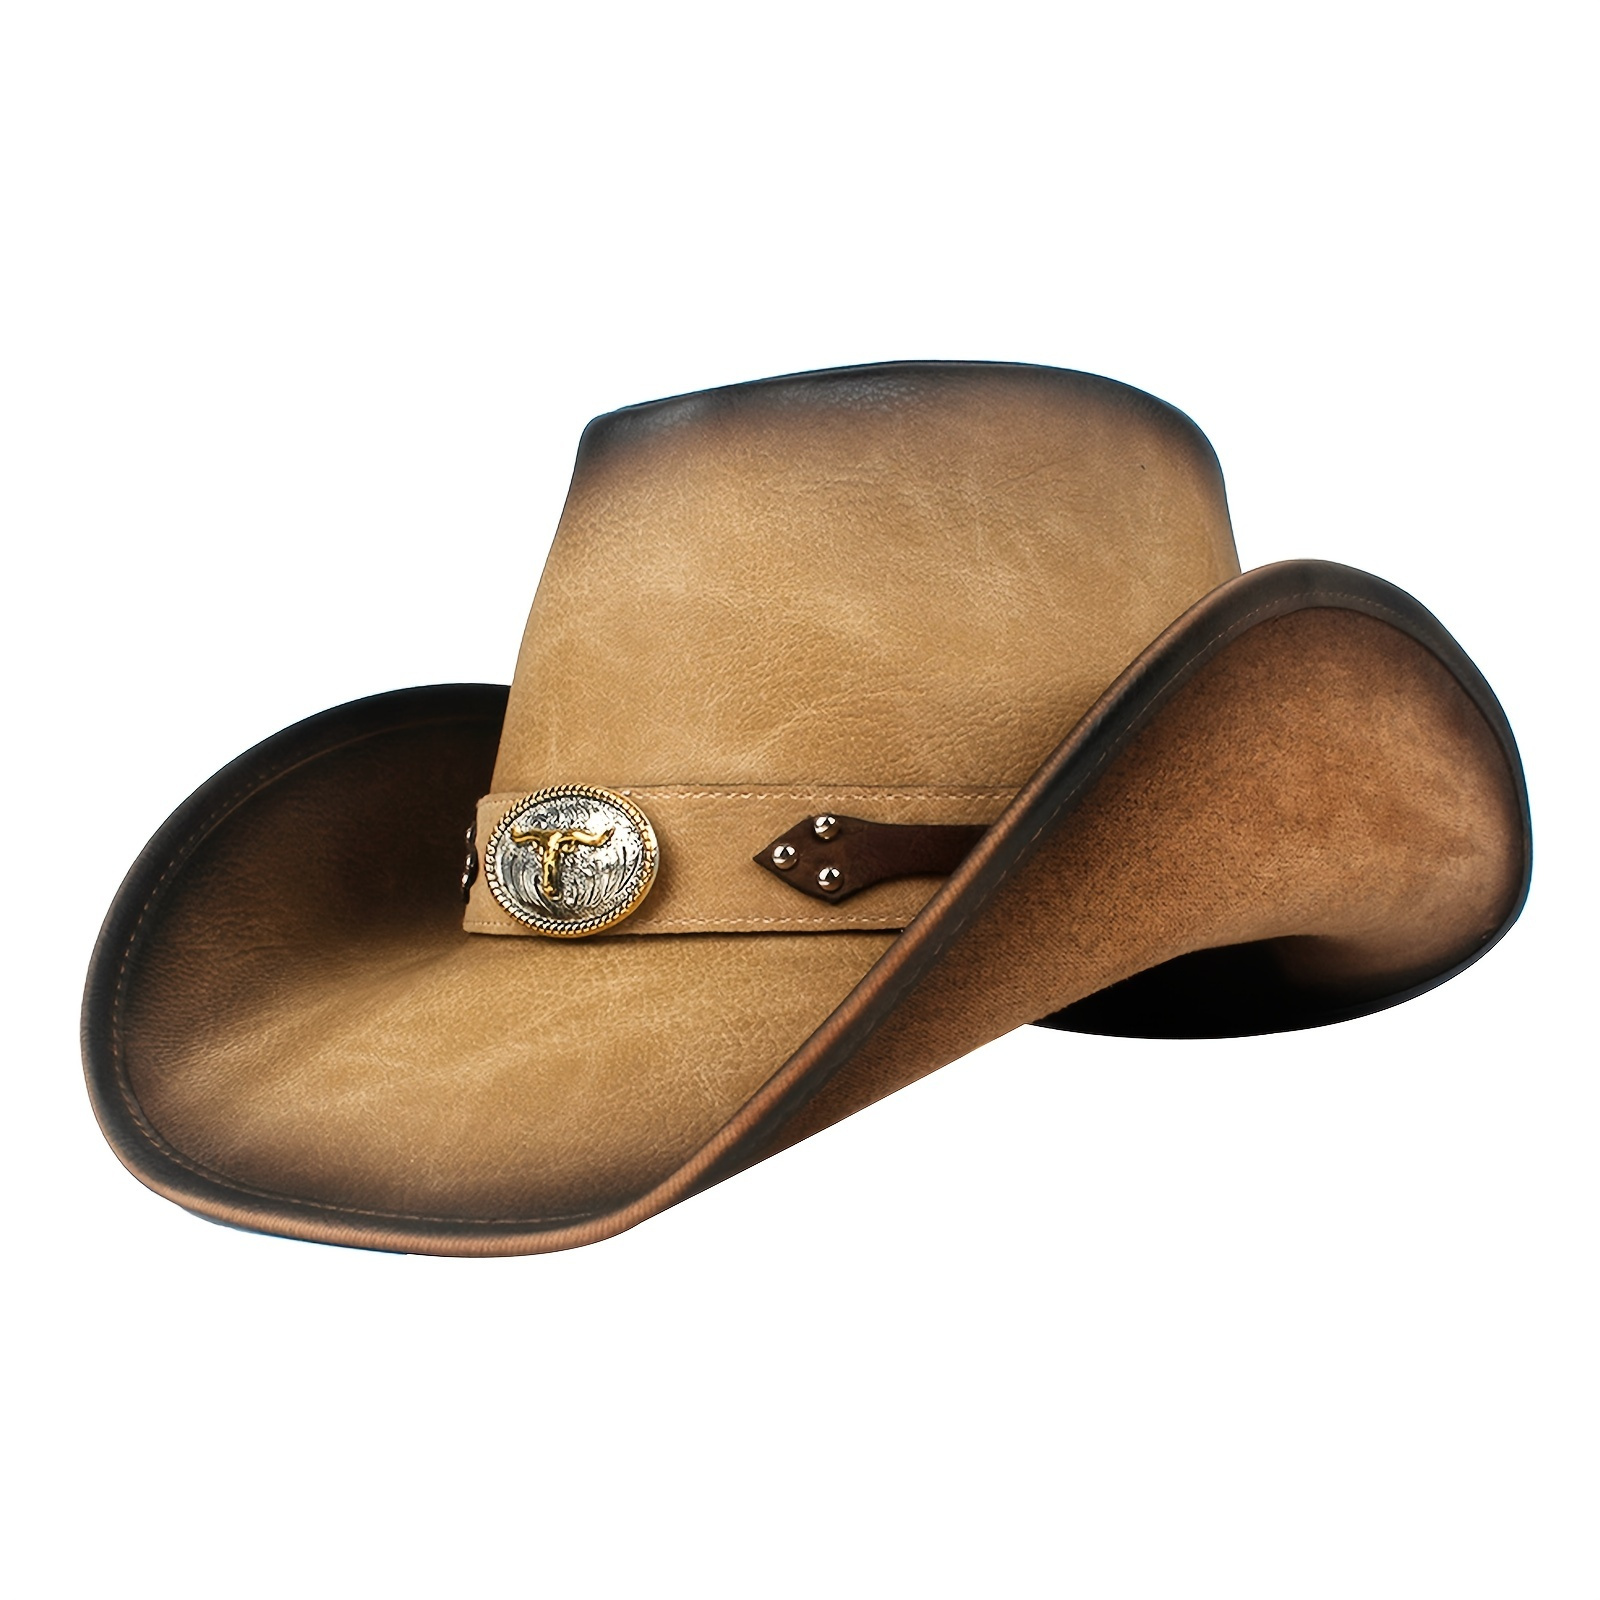 Classic PU Cowboy Western Hats for Men with Strap for Outdoor Activities - Western Style Cowgirl Cattleman Western Hats for Men for Autumn and Winter